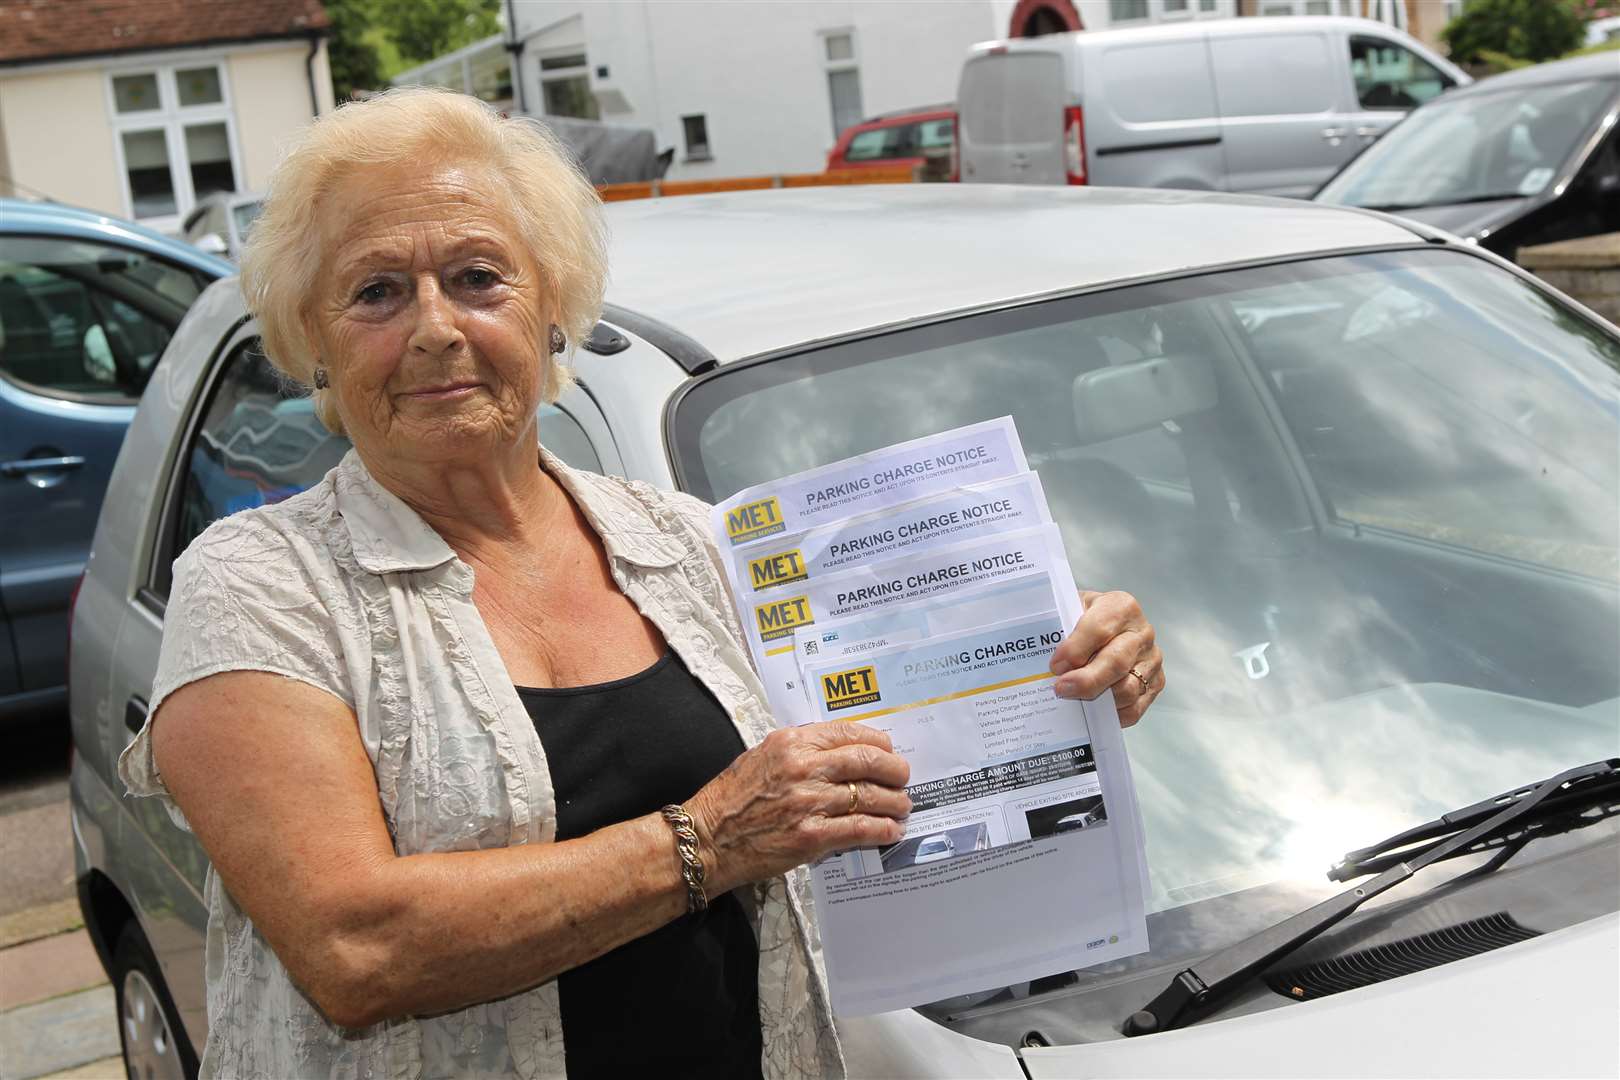 June Mace with four parking fines notices for £100 each, which she received after parking at Fairfield Leisure Centre.